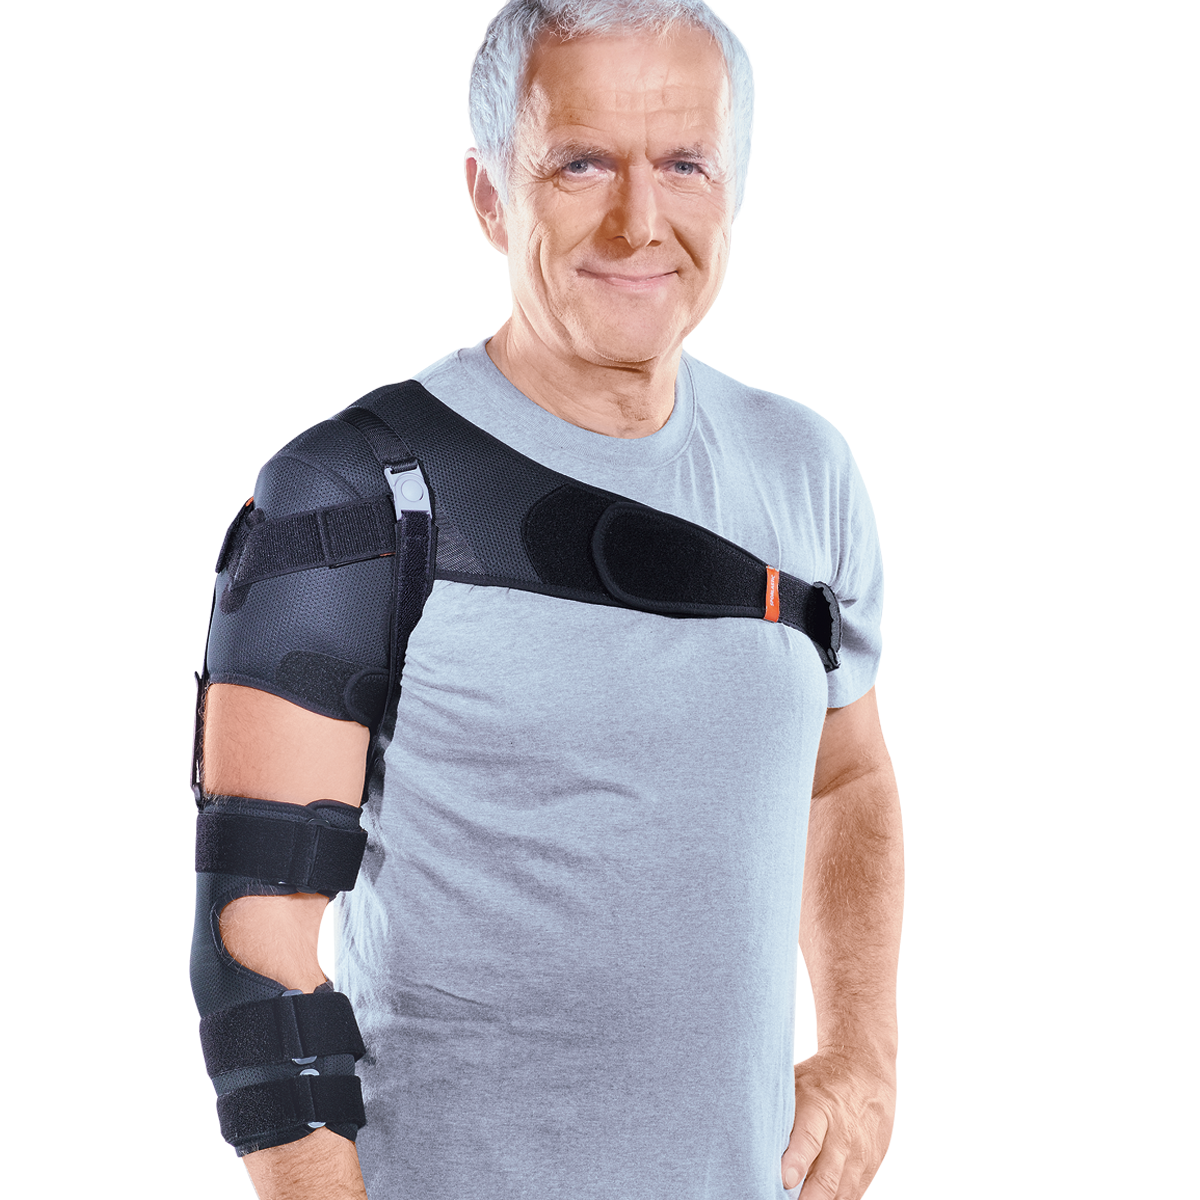 NEURO-LUX ® II Shoulder Joint Brace - physio supplies canada